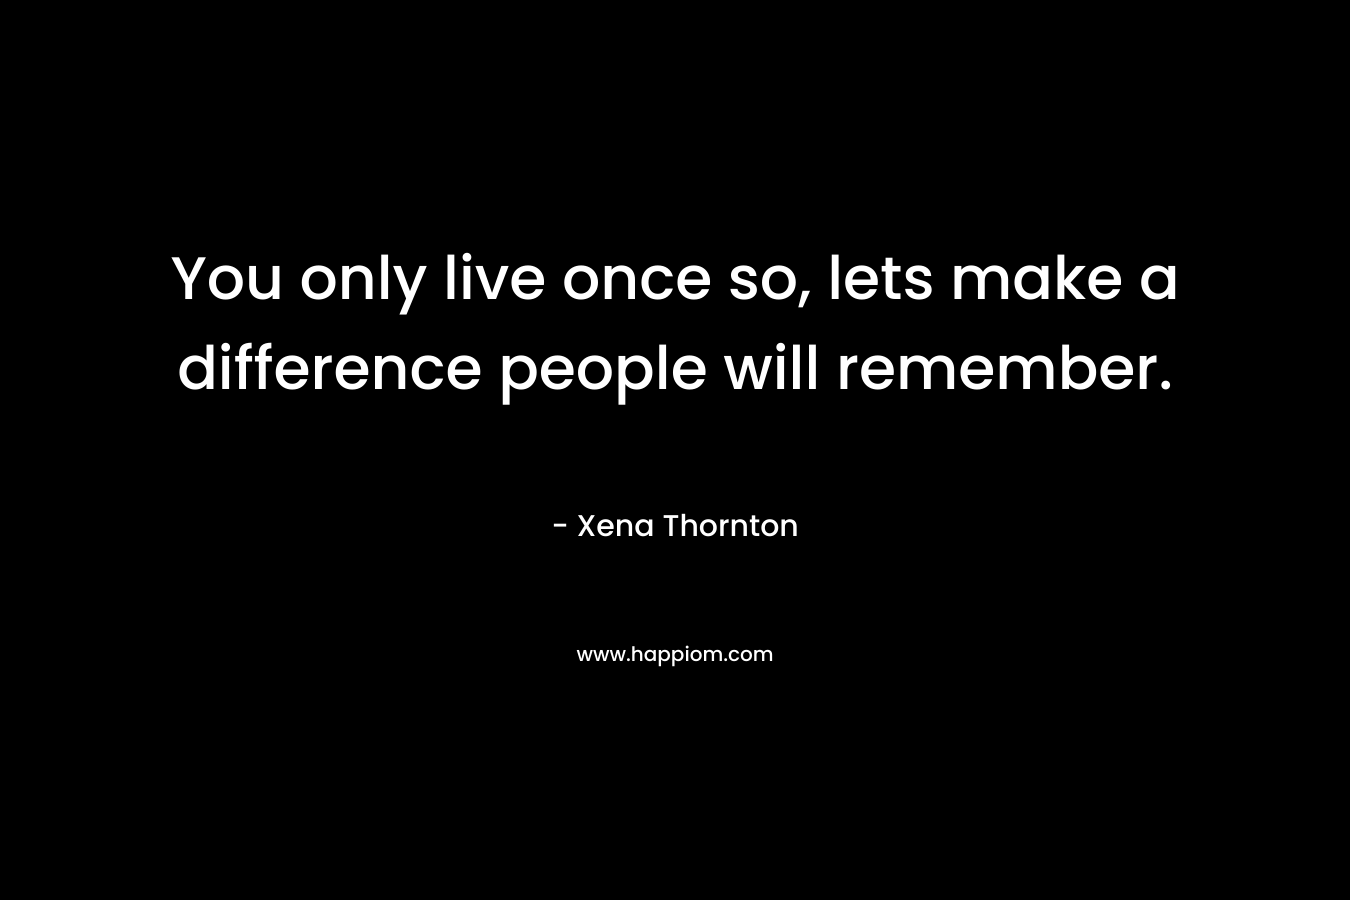 You only live once so, lets make a difference people will remember.